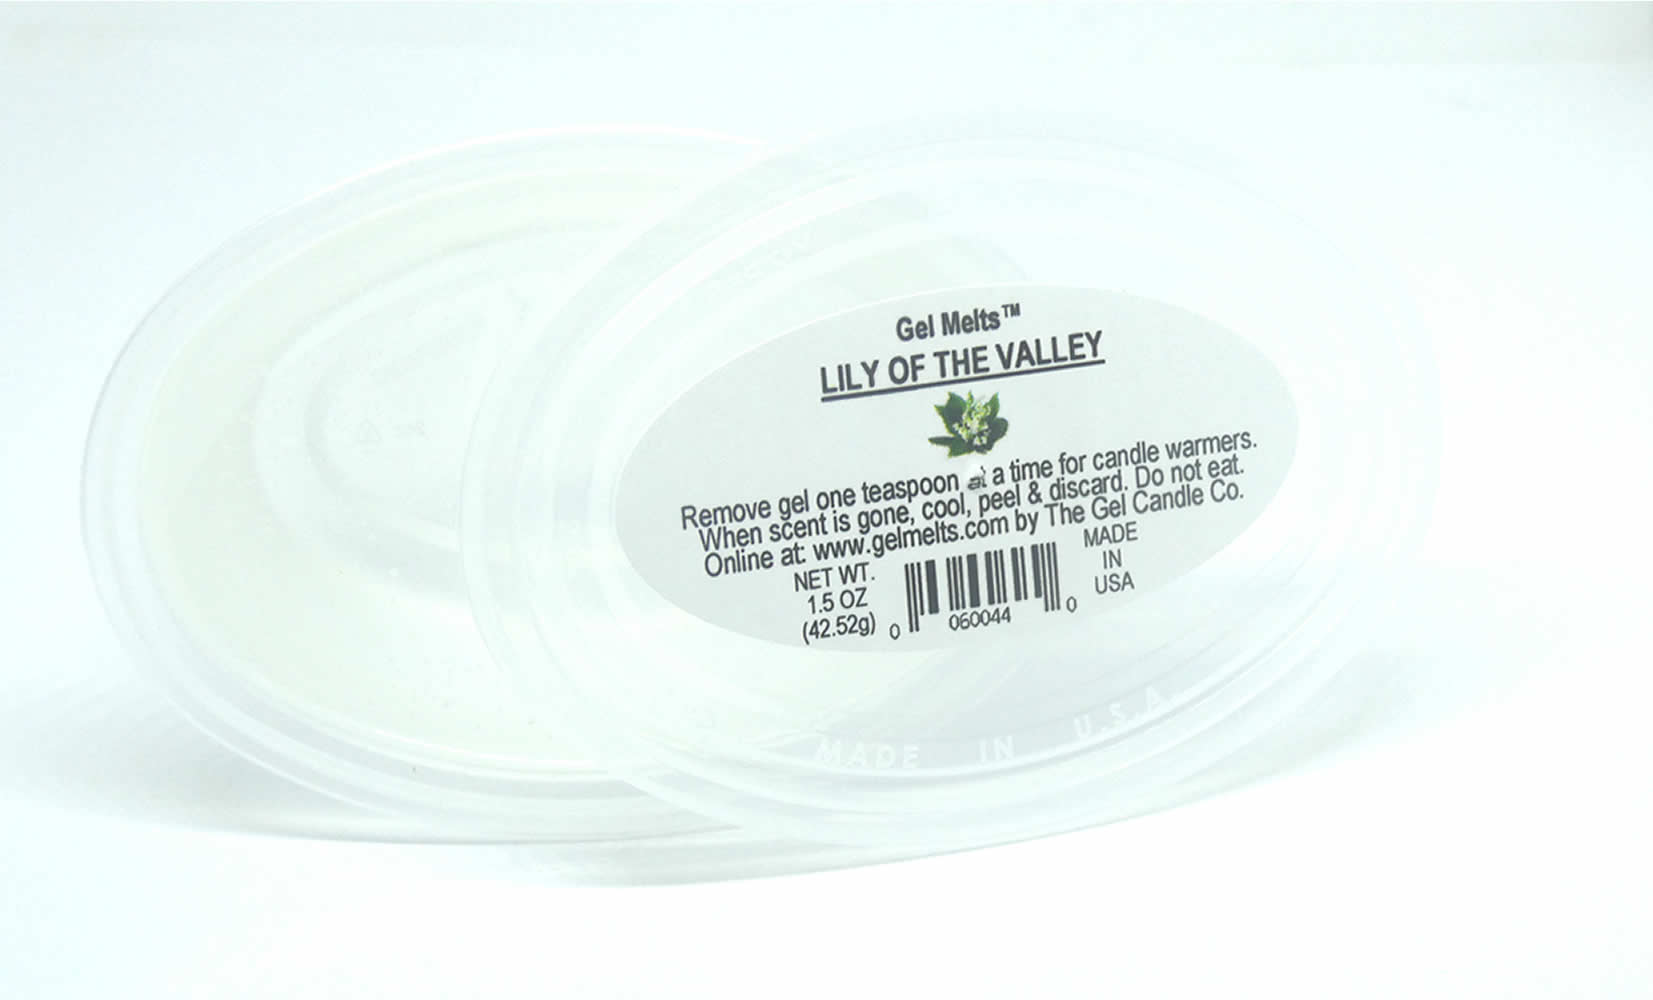 Lily Of The Valley scented Gel Melts™ Wax for warmers - 3 pack